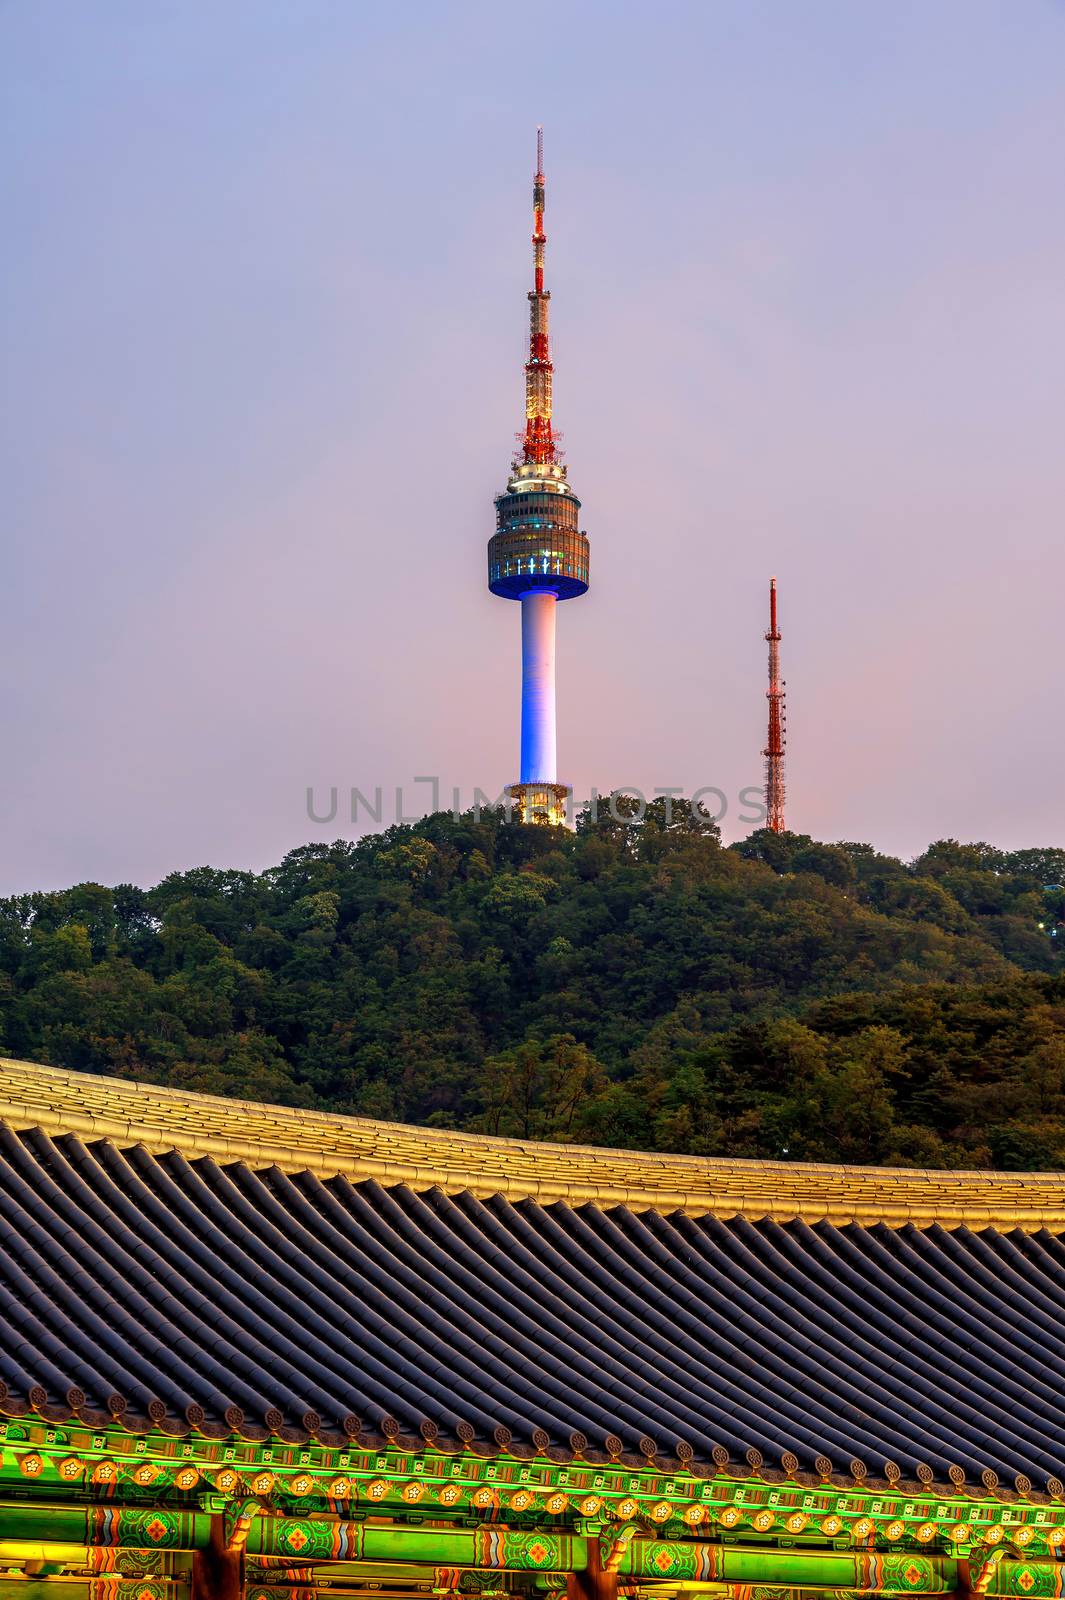 Namsangol Hannok Village and Seoul Tower Located on Namsan Mountain at night in Seoul,South Korea.